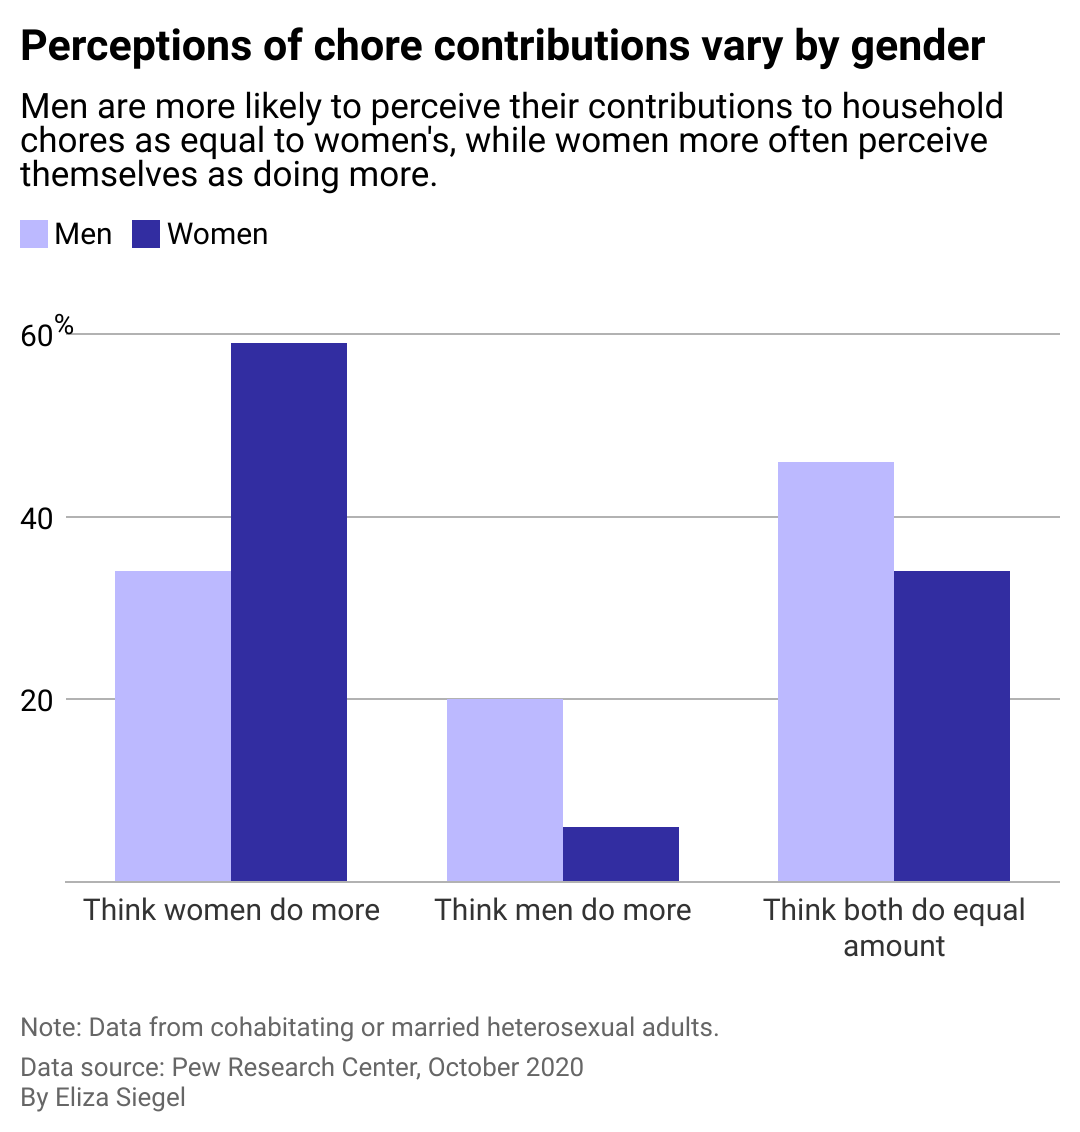 Column chart showing how perceptions of chore contributions vary by gender. Men are more likely to think they contribute equally to women, while women are more likely to see their own contributions as greater than mens'.